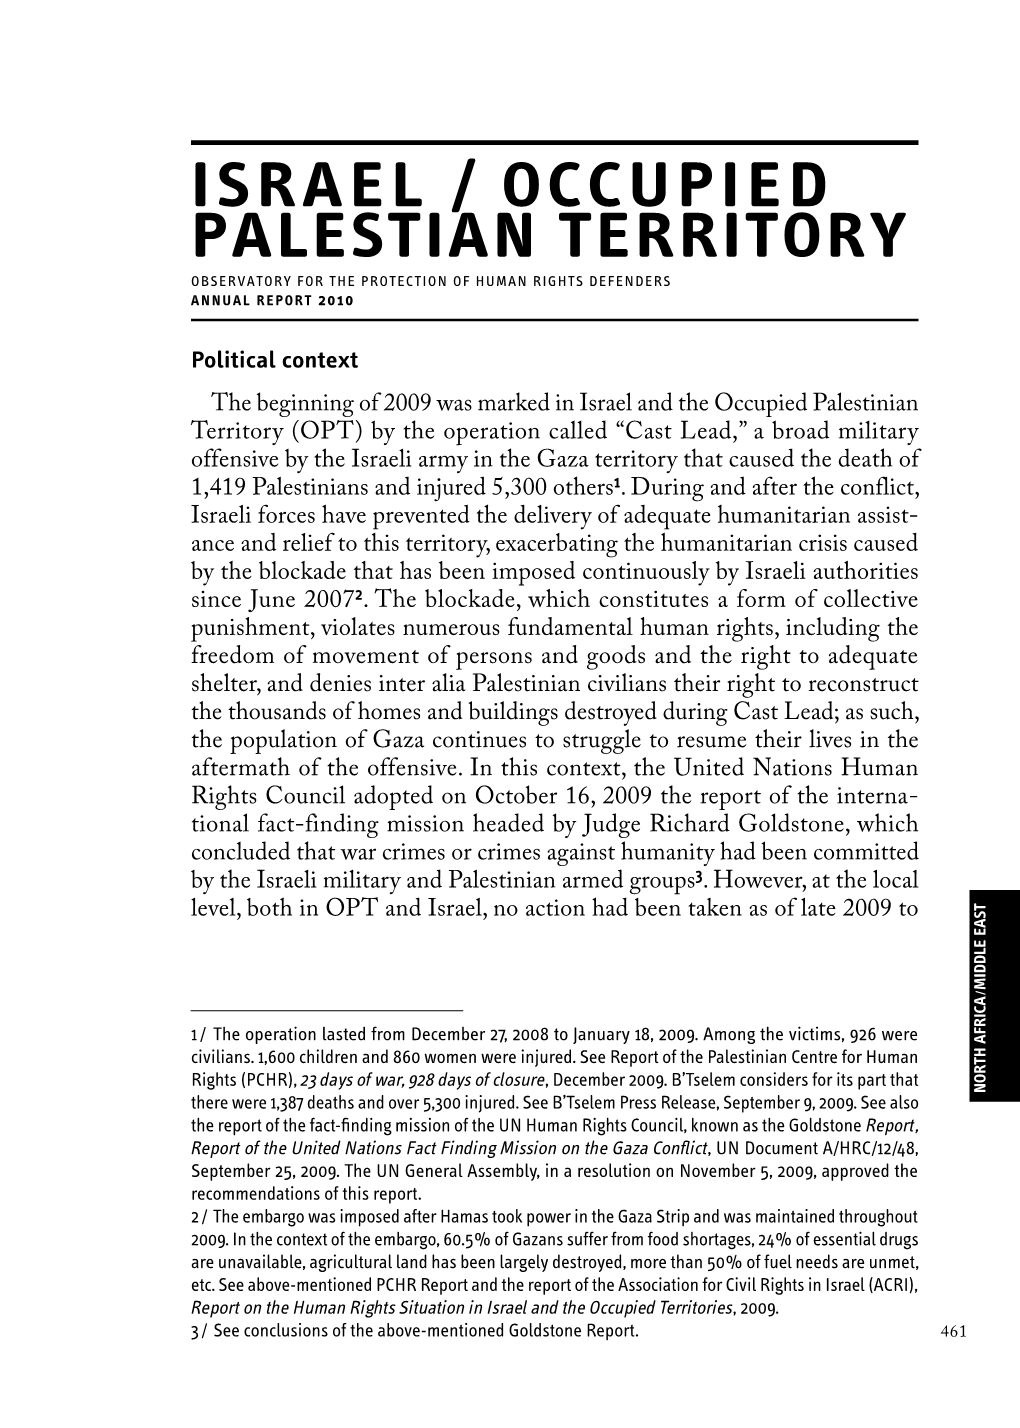 ISRAEL / OCCUPIED PALESTIAN TERRITORY Observatory for the Protection of Human Rights Defenders Annual Report 2010